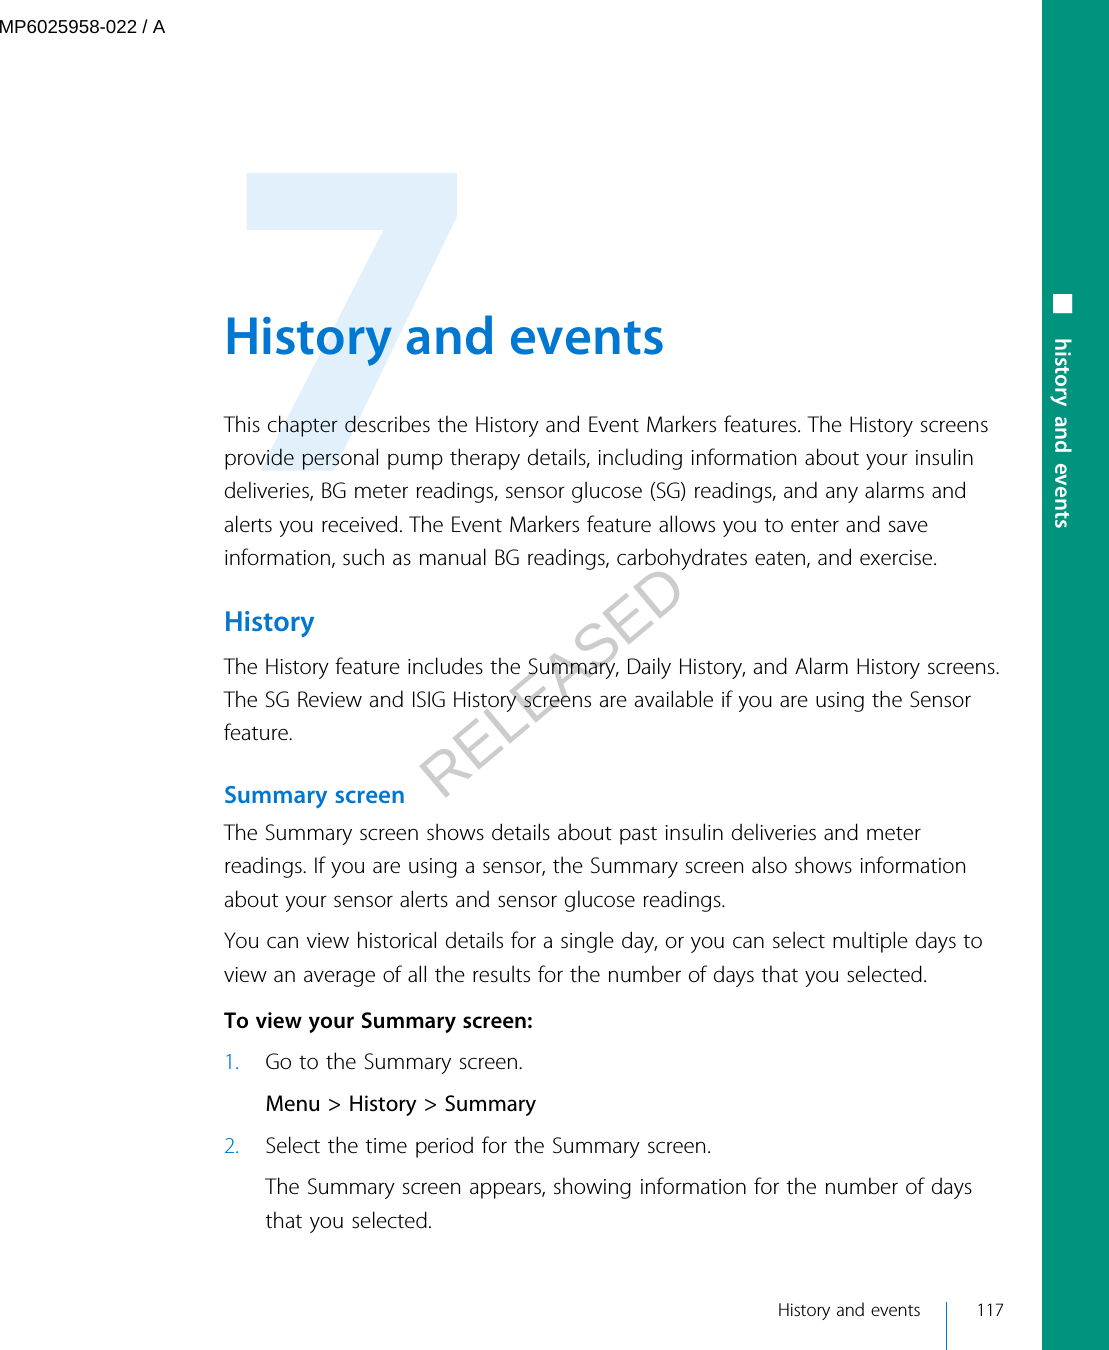  History and eventsThis chapter describes the History and Event Markers features. The History screensprovide personal pump therapy details, including information about your insulindeliveries, BG meter readings, sensor glucose (SG) readings, and any alarms andalerts you received. The Event Markers feature allows you to enter and saveinformation, such as manual BG readings, carbohydrates eaten, and exercise.HistoryThe History feature includes the Summary, Daily History, and Alarm History screens.The SG Review and ISIG History screens are available if you are using the Sensorfeature.Summary screenThe Summary screen shows details about past insulin deliveries and meterreadings. If you are using a sensor, the Summary screen also shows informationabout your sensor alerts and sensor glucose readings.You can view historical details for a single day, or you can select multiple days toview an average of all the results for the number of days that you selected. To view your Summary screen:1. Go to the Summary screen.Menu &gt; History &gt; Summary2. Select the time period for the Summary screen.The Summary screen appears, showing information for the number of daysthat you selected. History and events 117■ history and eventsMP6025958-022 / ARELEASED